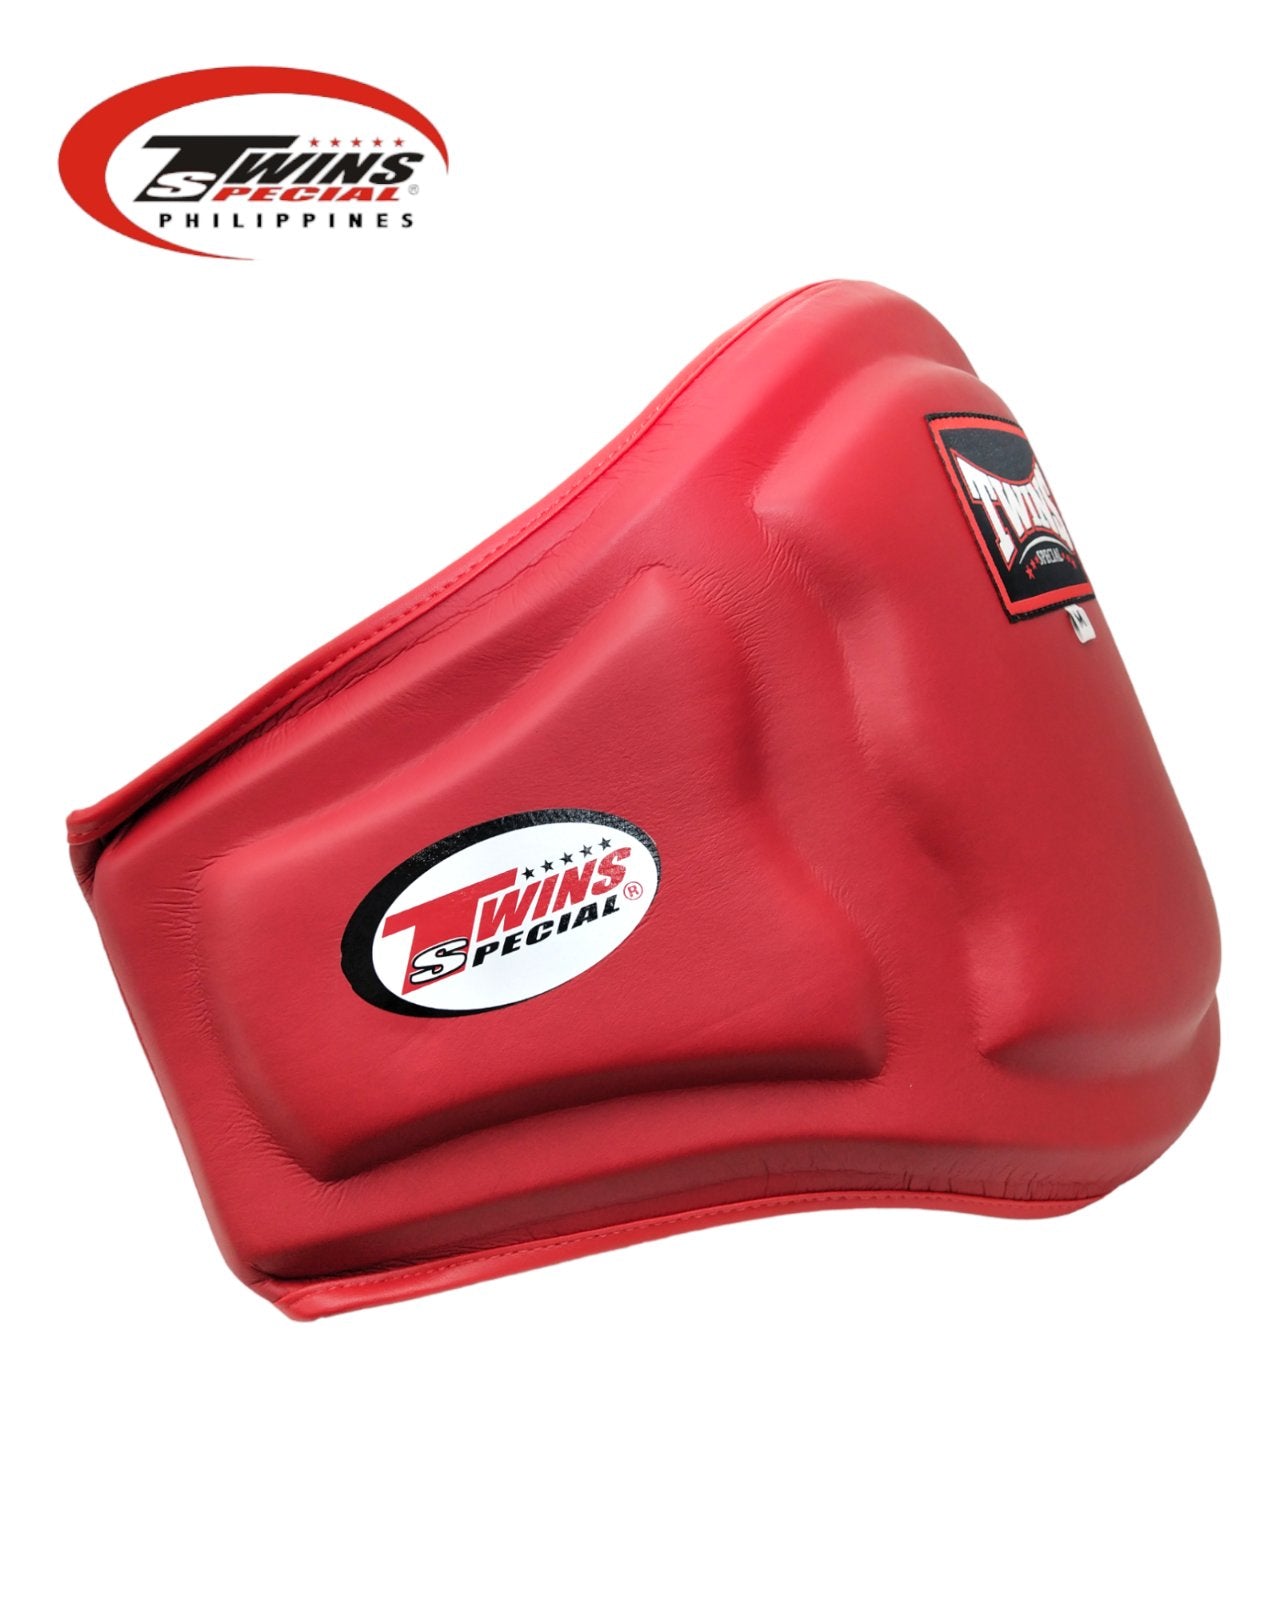 TWINS SPECIAL BEPS3 Muaythai Belly Pads Red